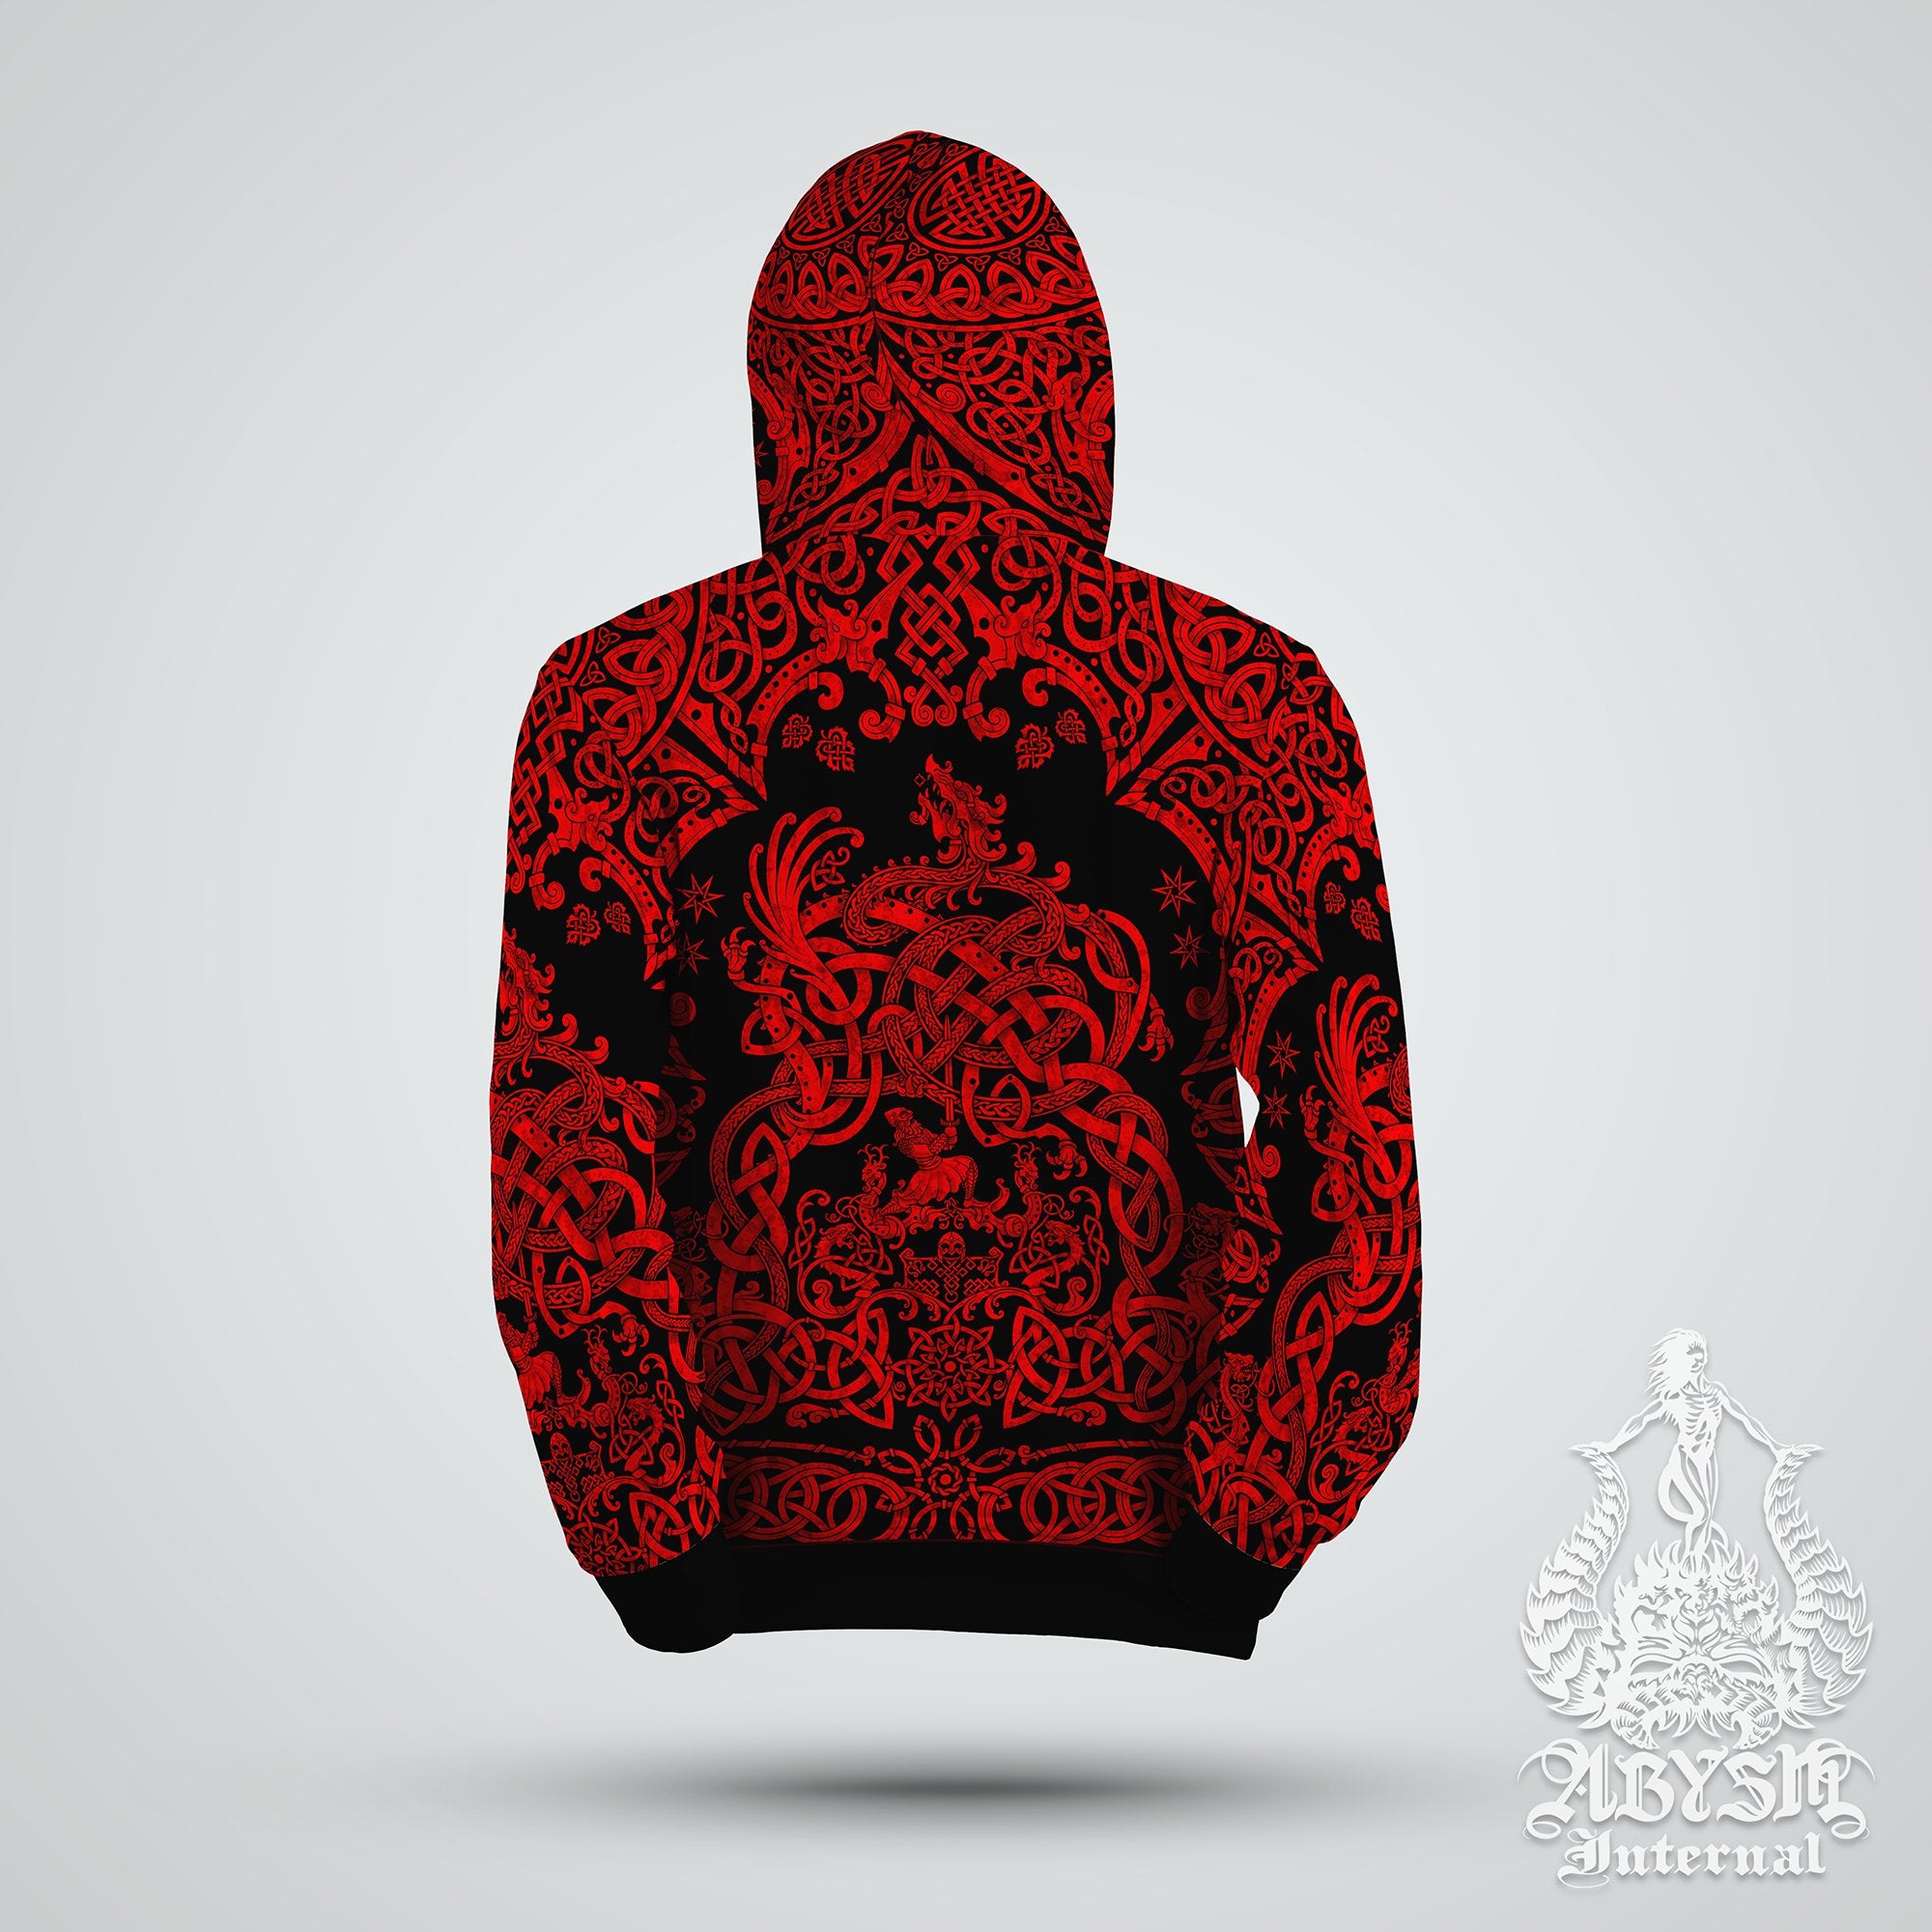 Viking Hoodie, Black and Red Pullover, Street Outfit, Norse Sweater, Nordic Art Streetwear, Alternative Clothing, Unisex - Dragon Fafnir - Abysm Internal